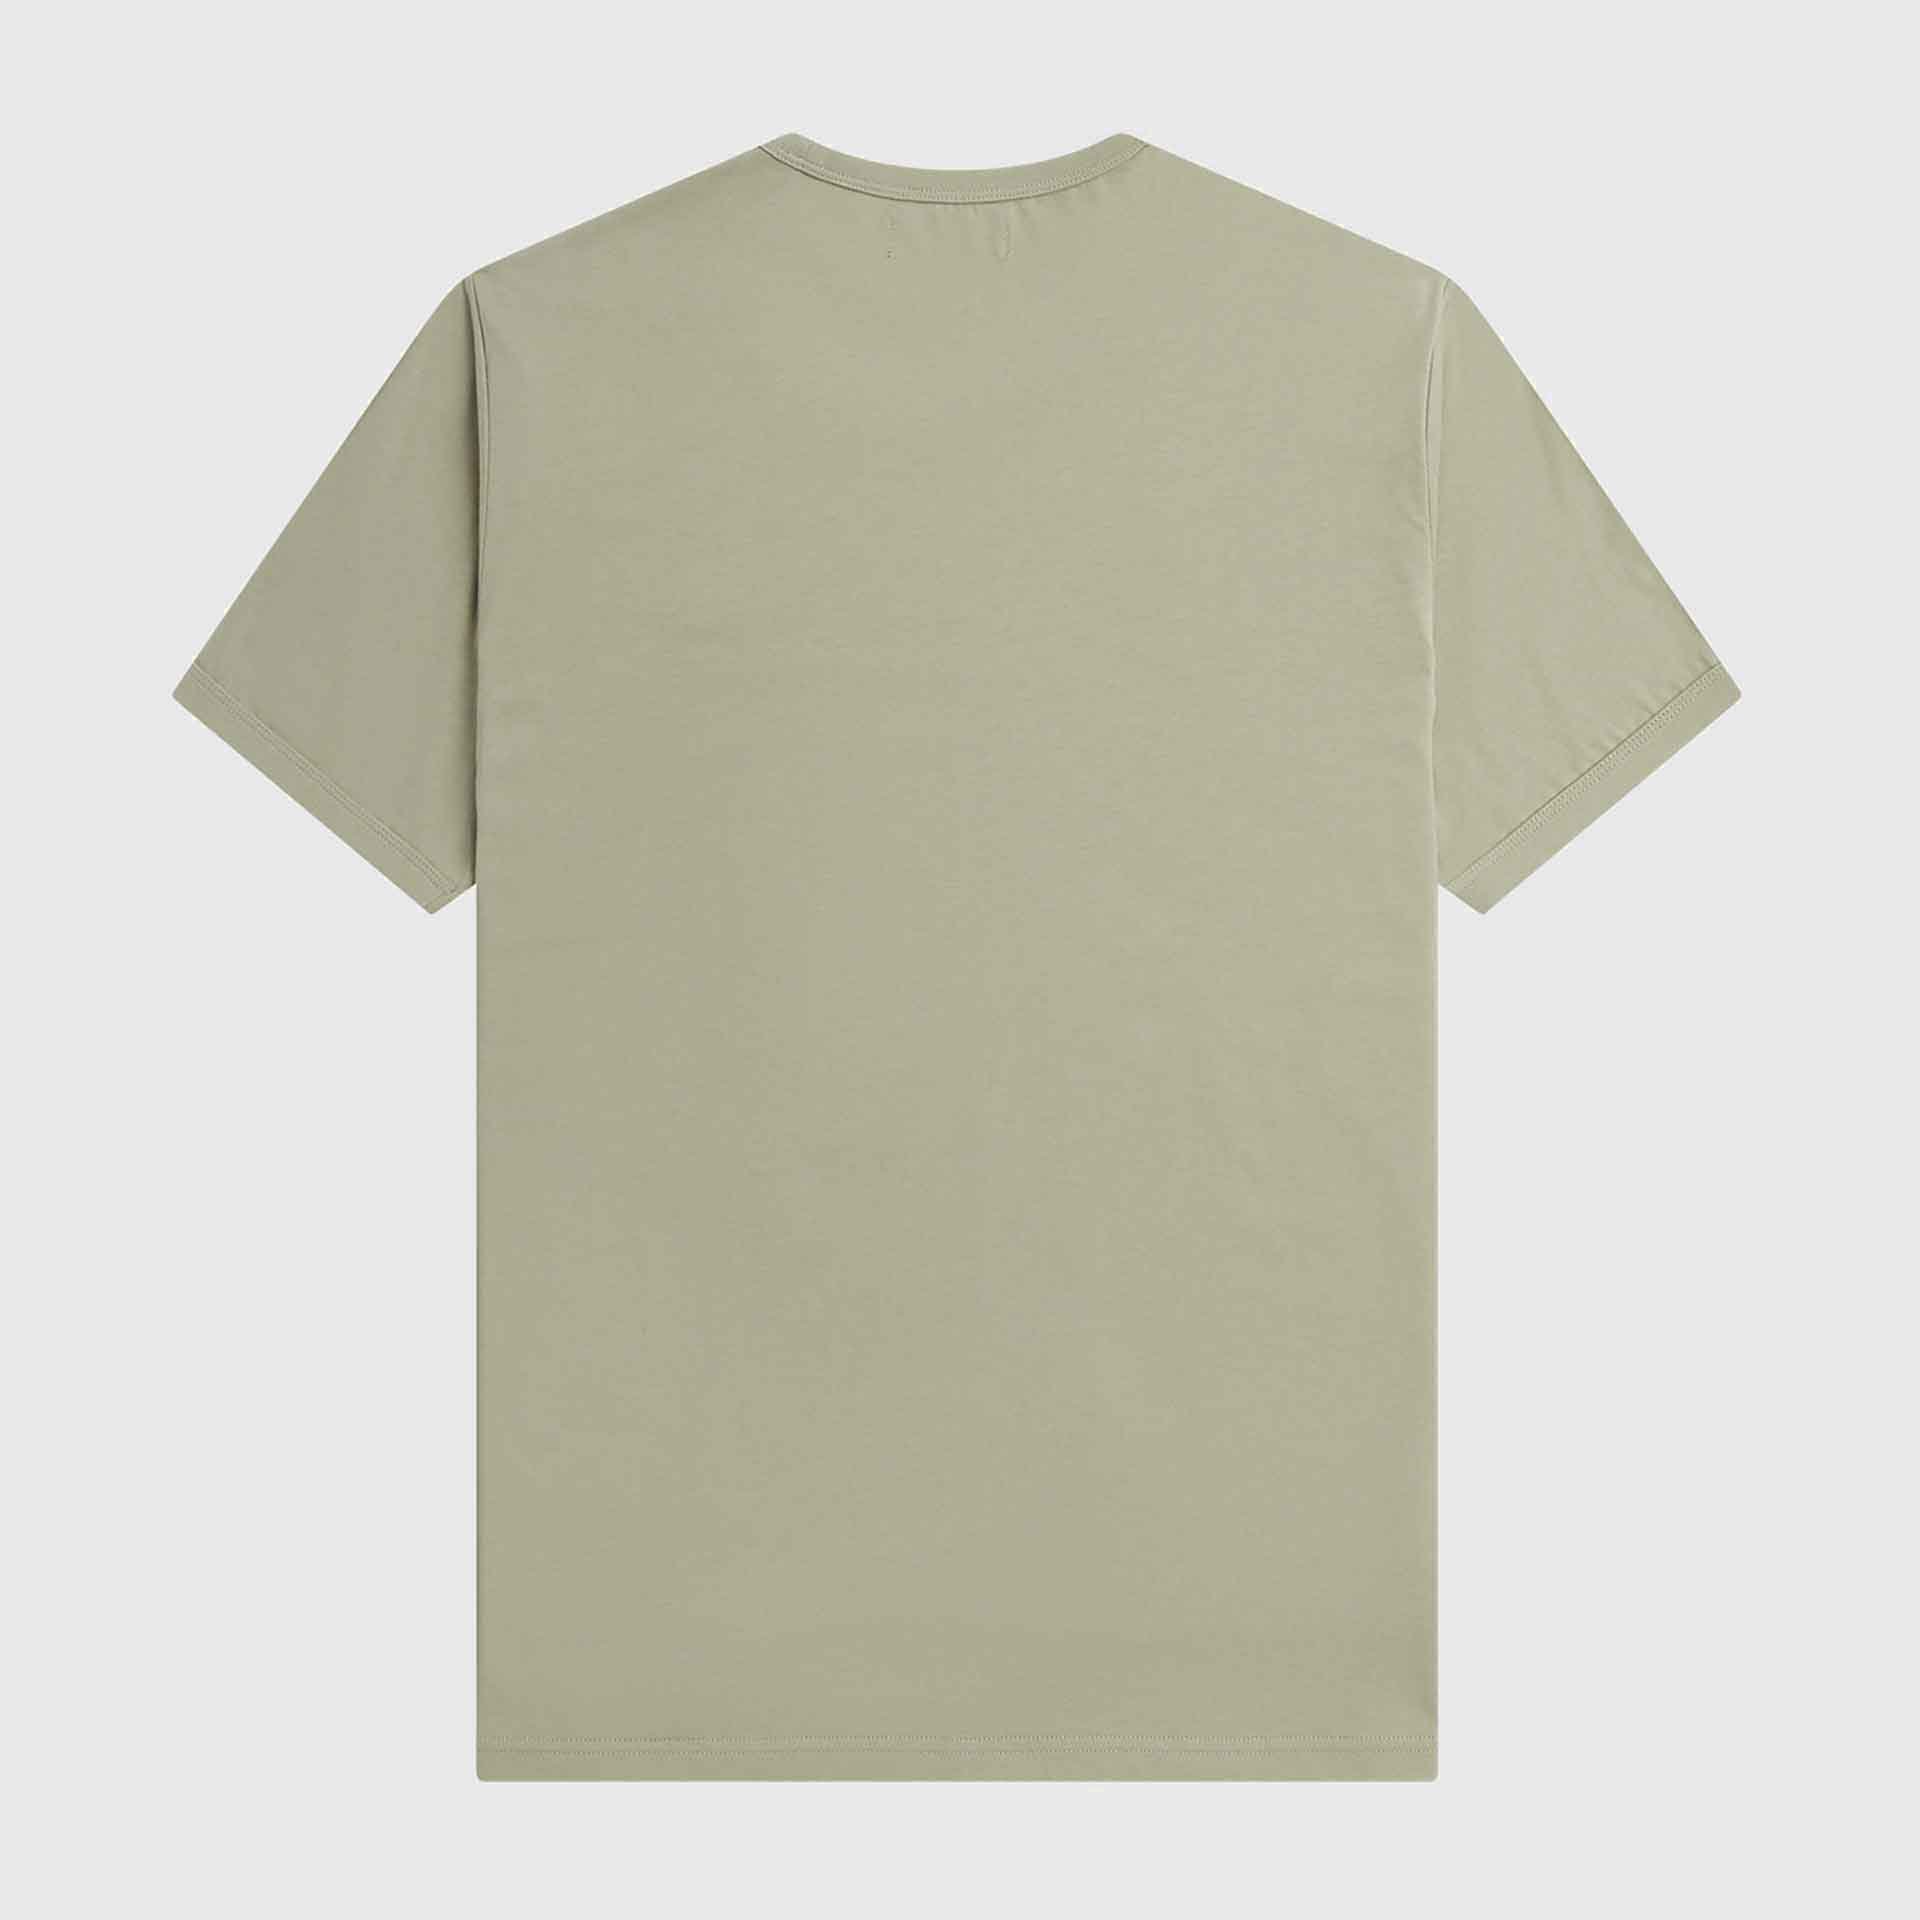 Fred Perry Ringer T-Shirt Seagrass